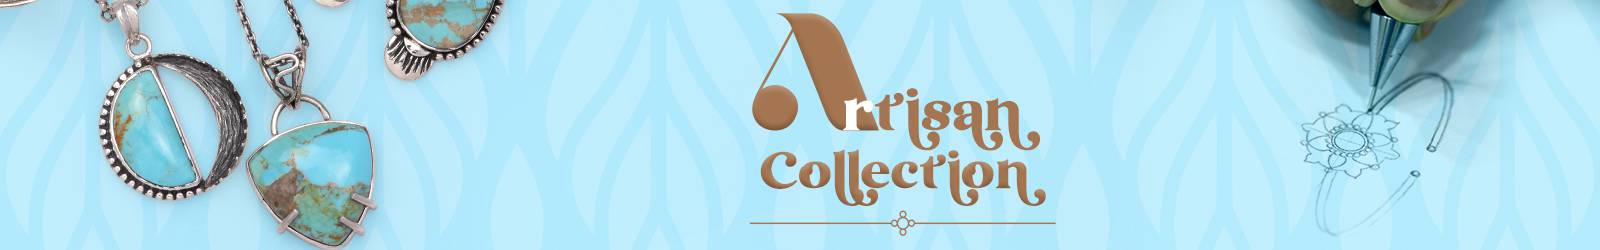 Artisan Jewelry Collection